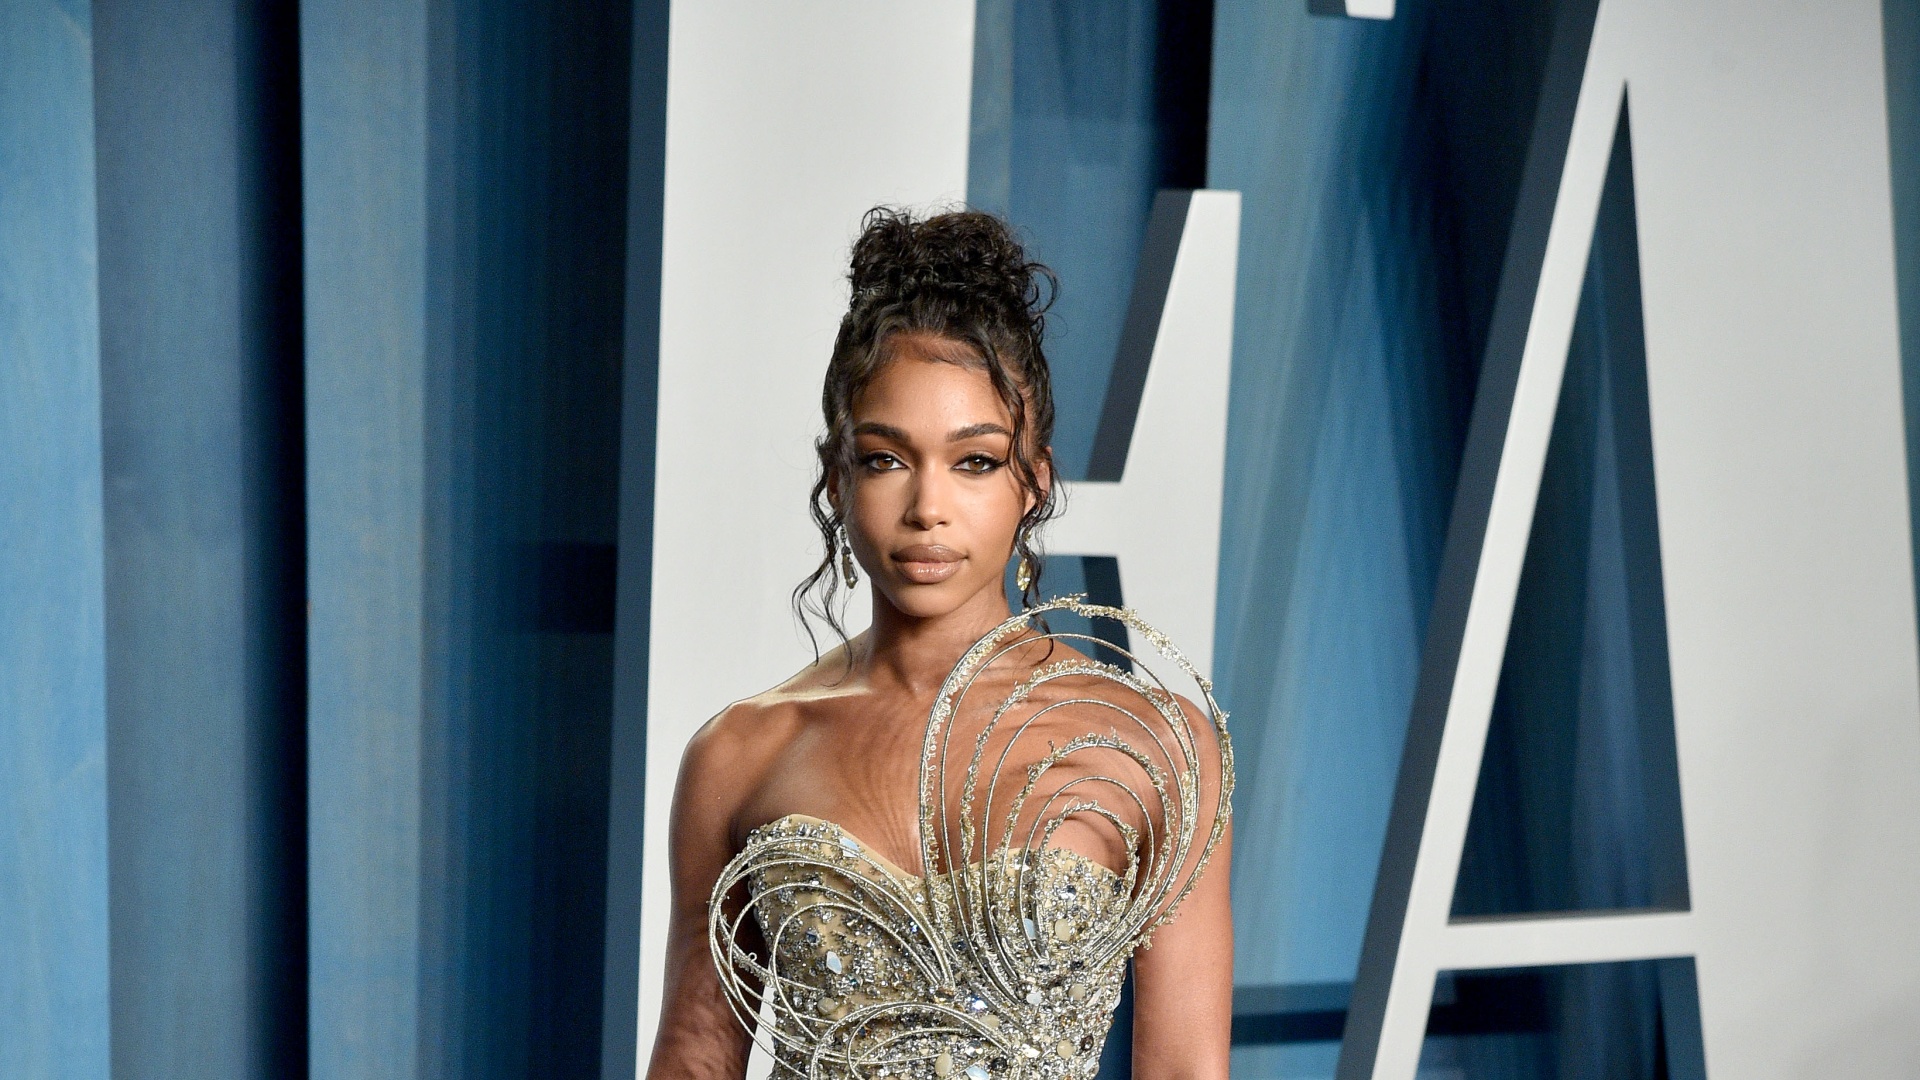 Lori Harvey’s Hairstylist Shares Tips On Mastering The Perfect Updo